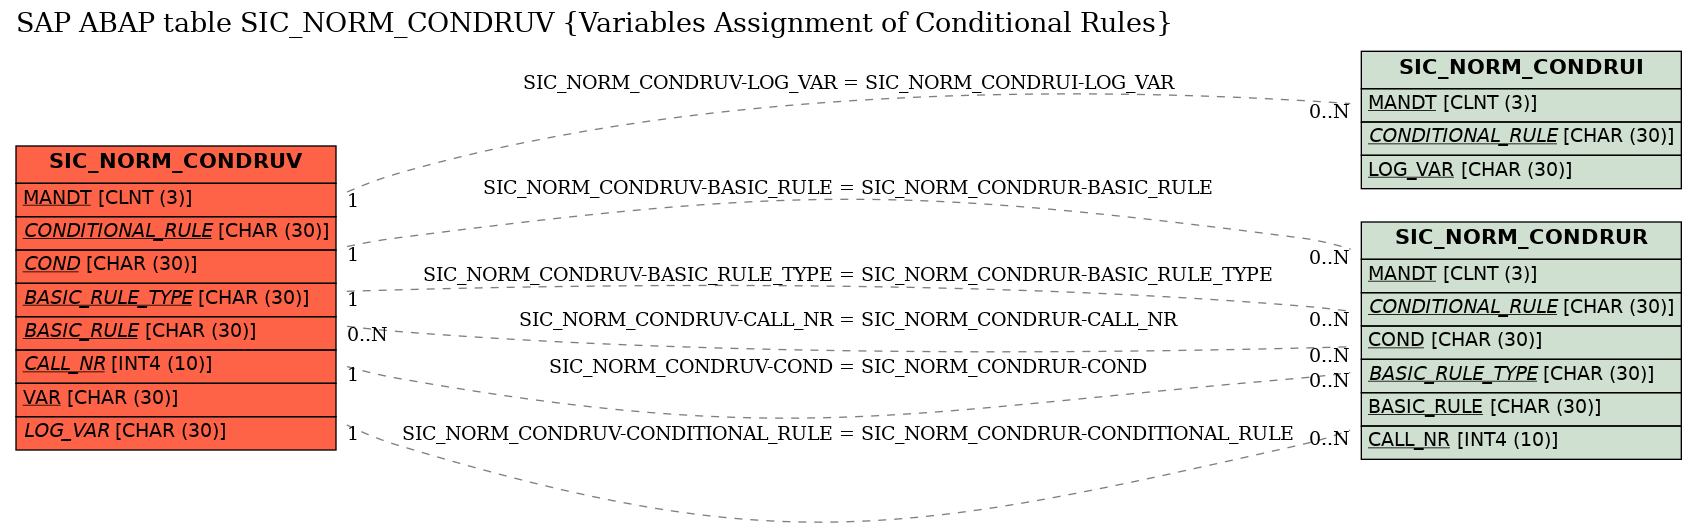 E-R Diagram for table SIC_NORM_CONDRUV (Variables Assignment of Conditional Rules)